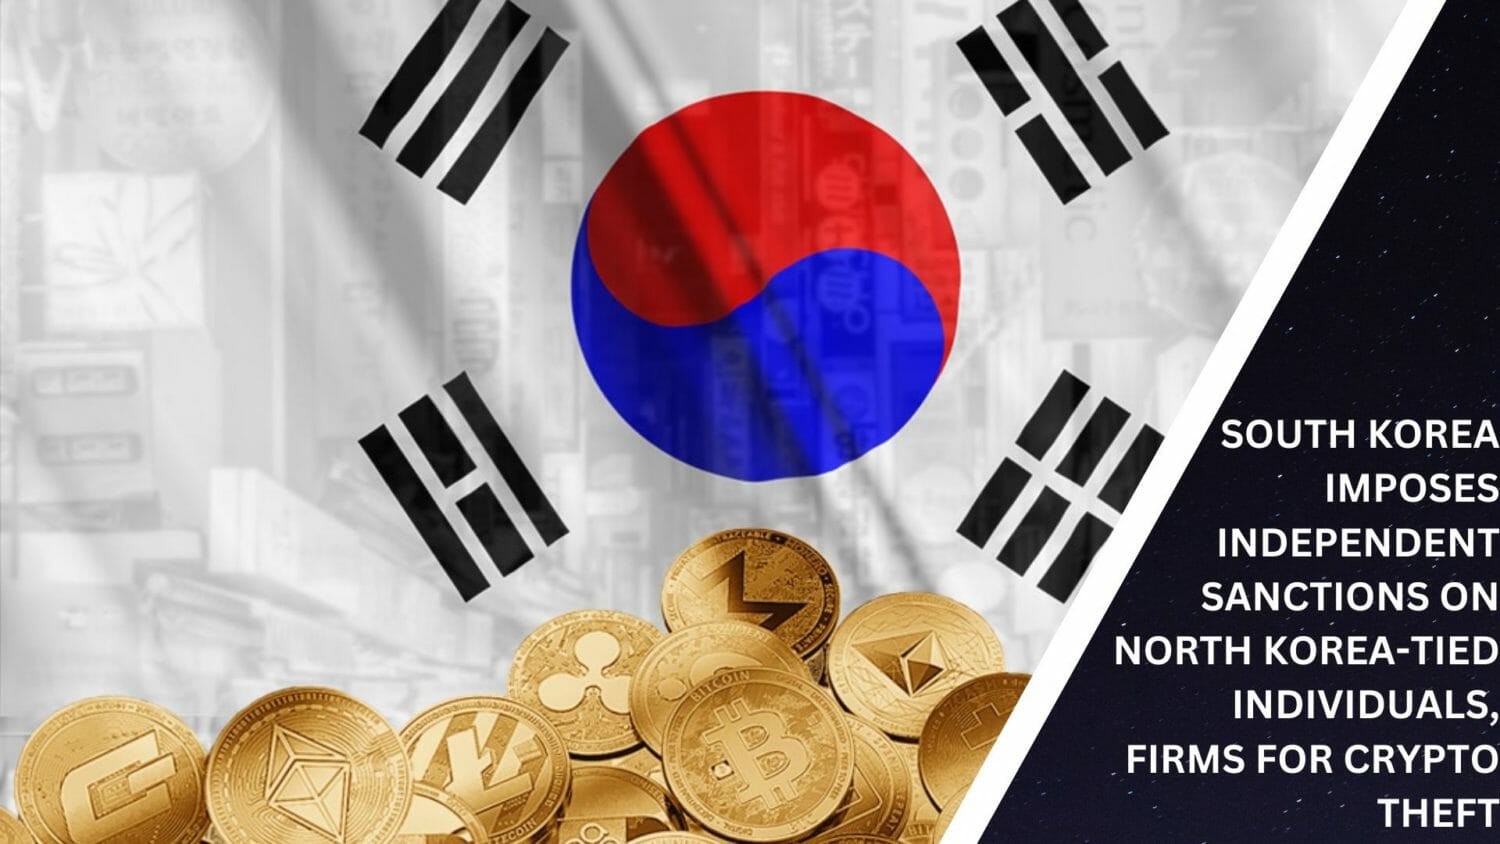 South Korea Imposes Independent Sanctions On North Korea-Tied Individuals, Firms For Crypto Theft